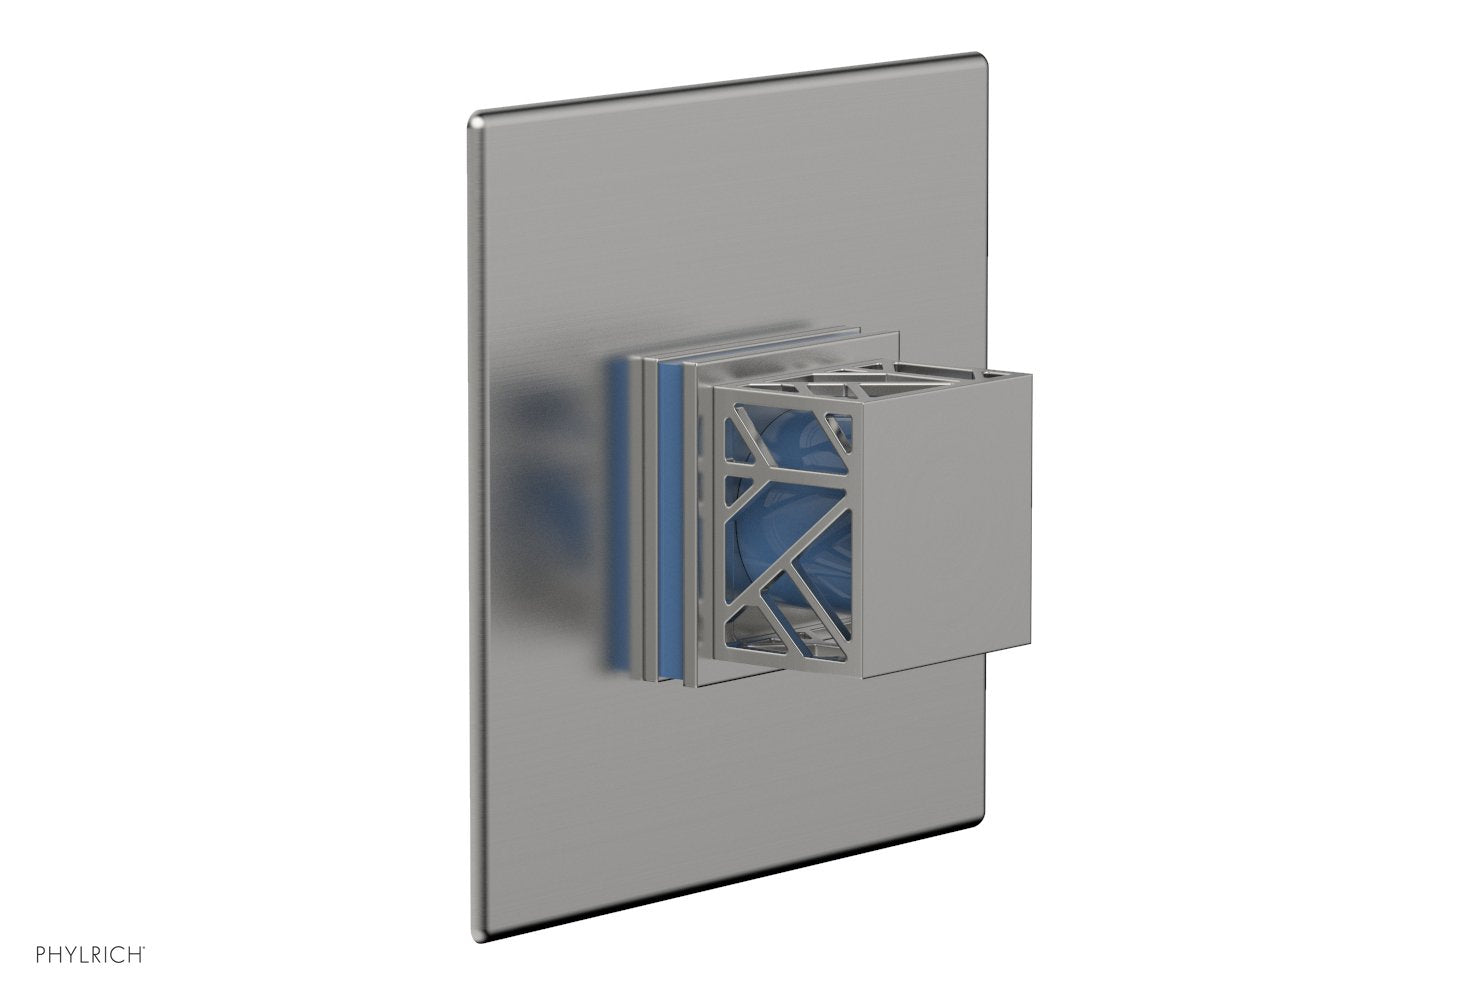 Phylrich JOLIE Thermostatic Shower Trim, Square Handle with "Light Blue" Accents